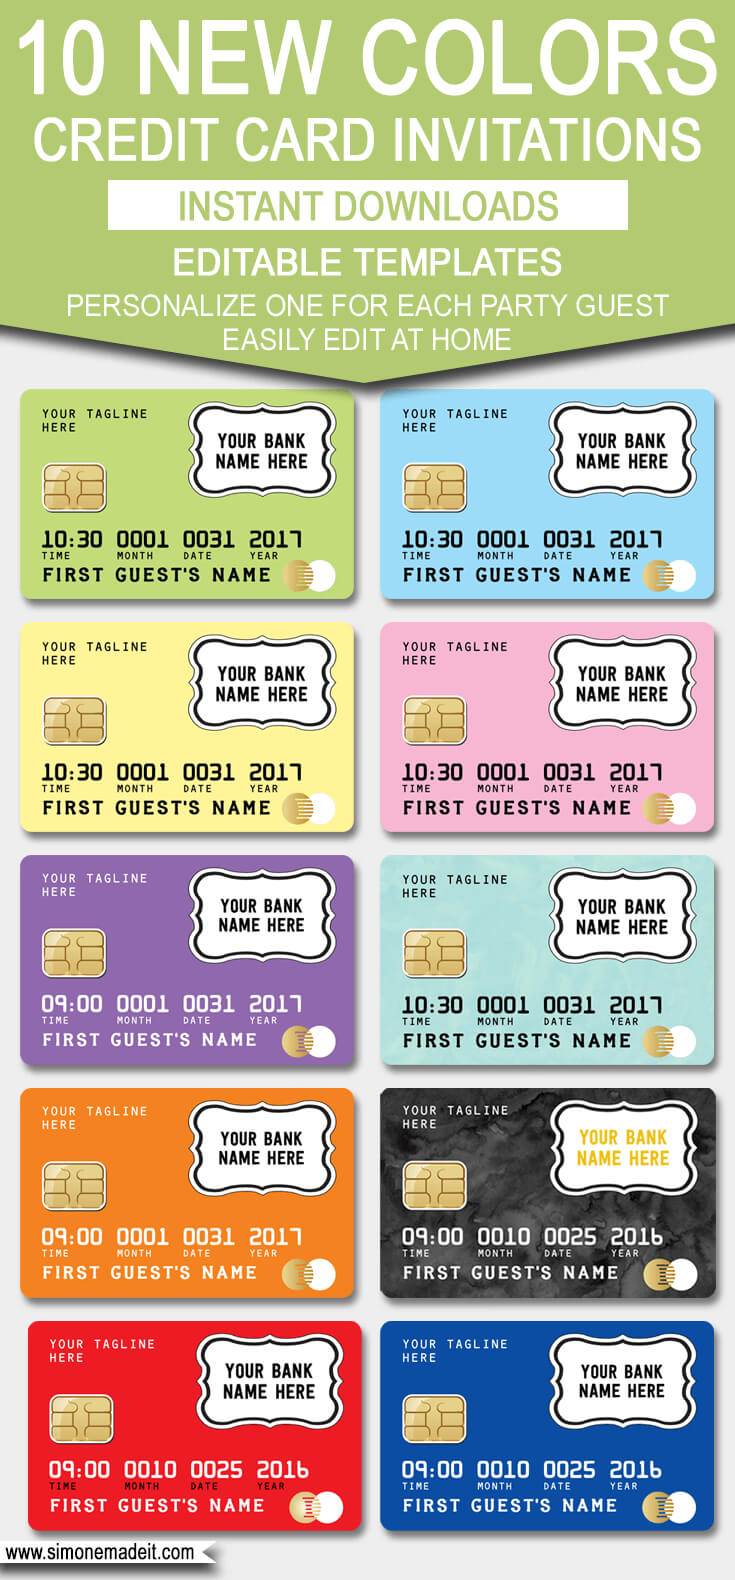 Credit Card Invitation Template – New Colors! | Scavenger Regarding Credit Card Template For Kids